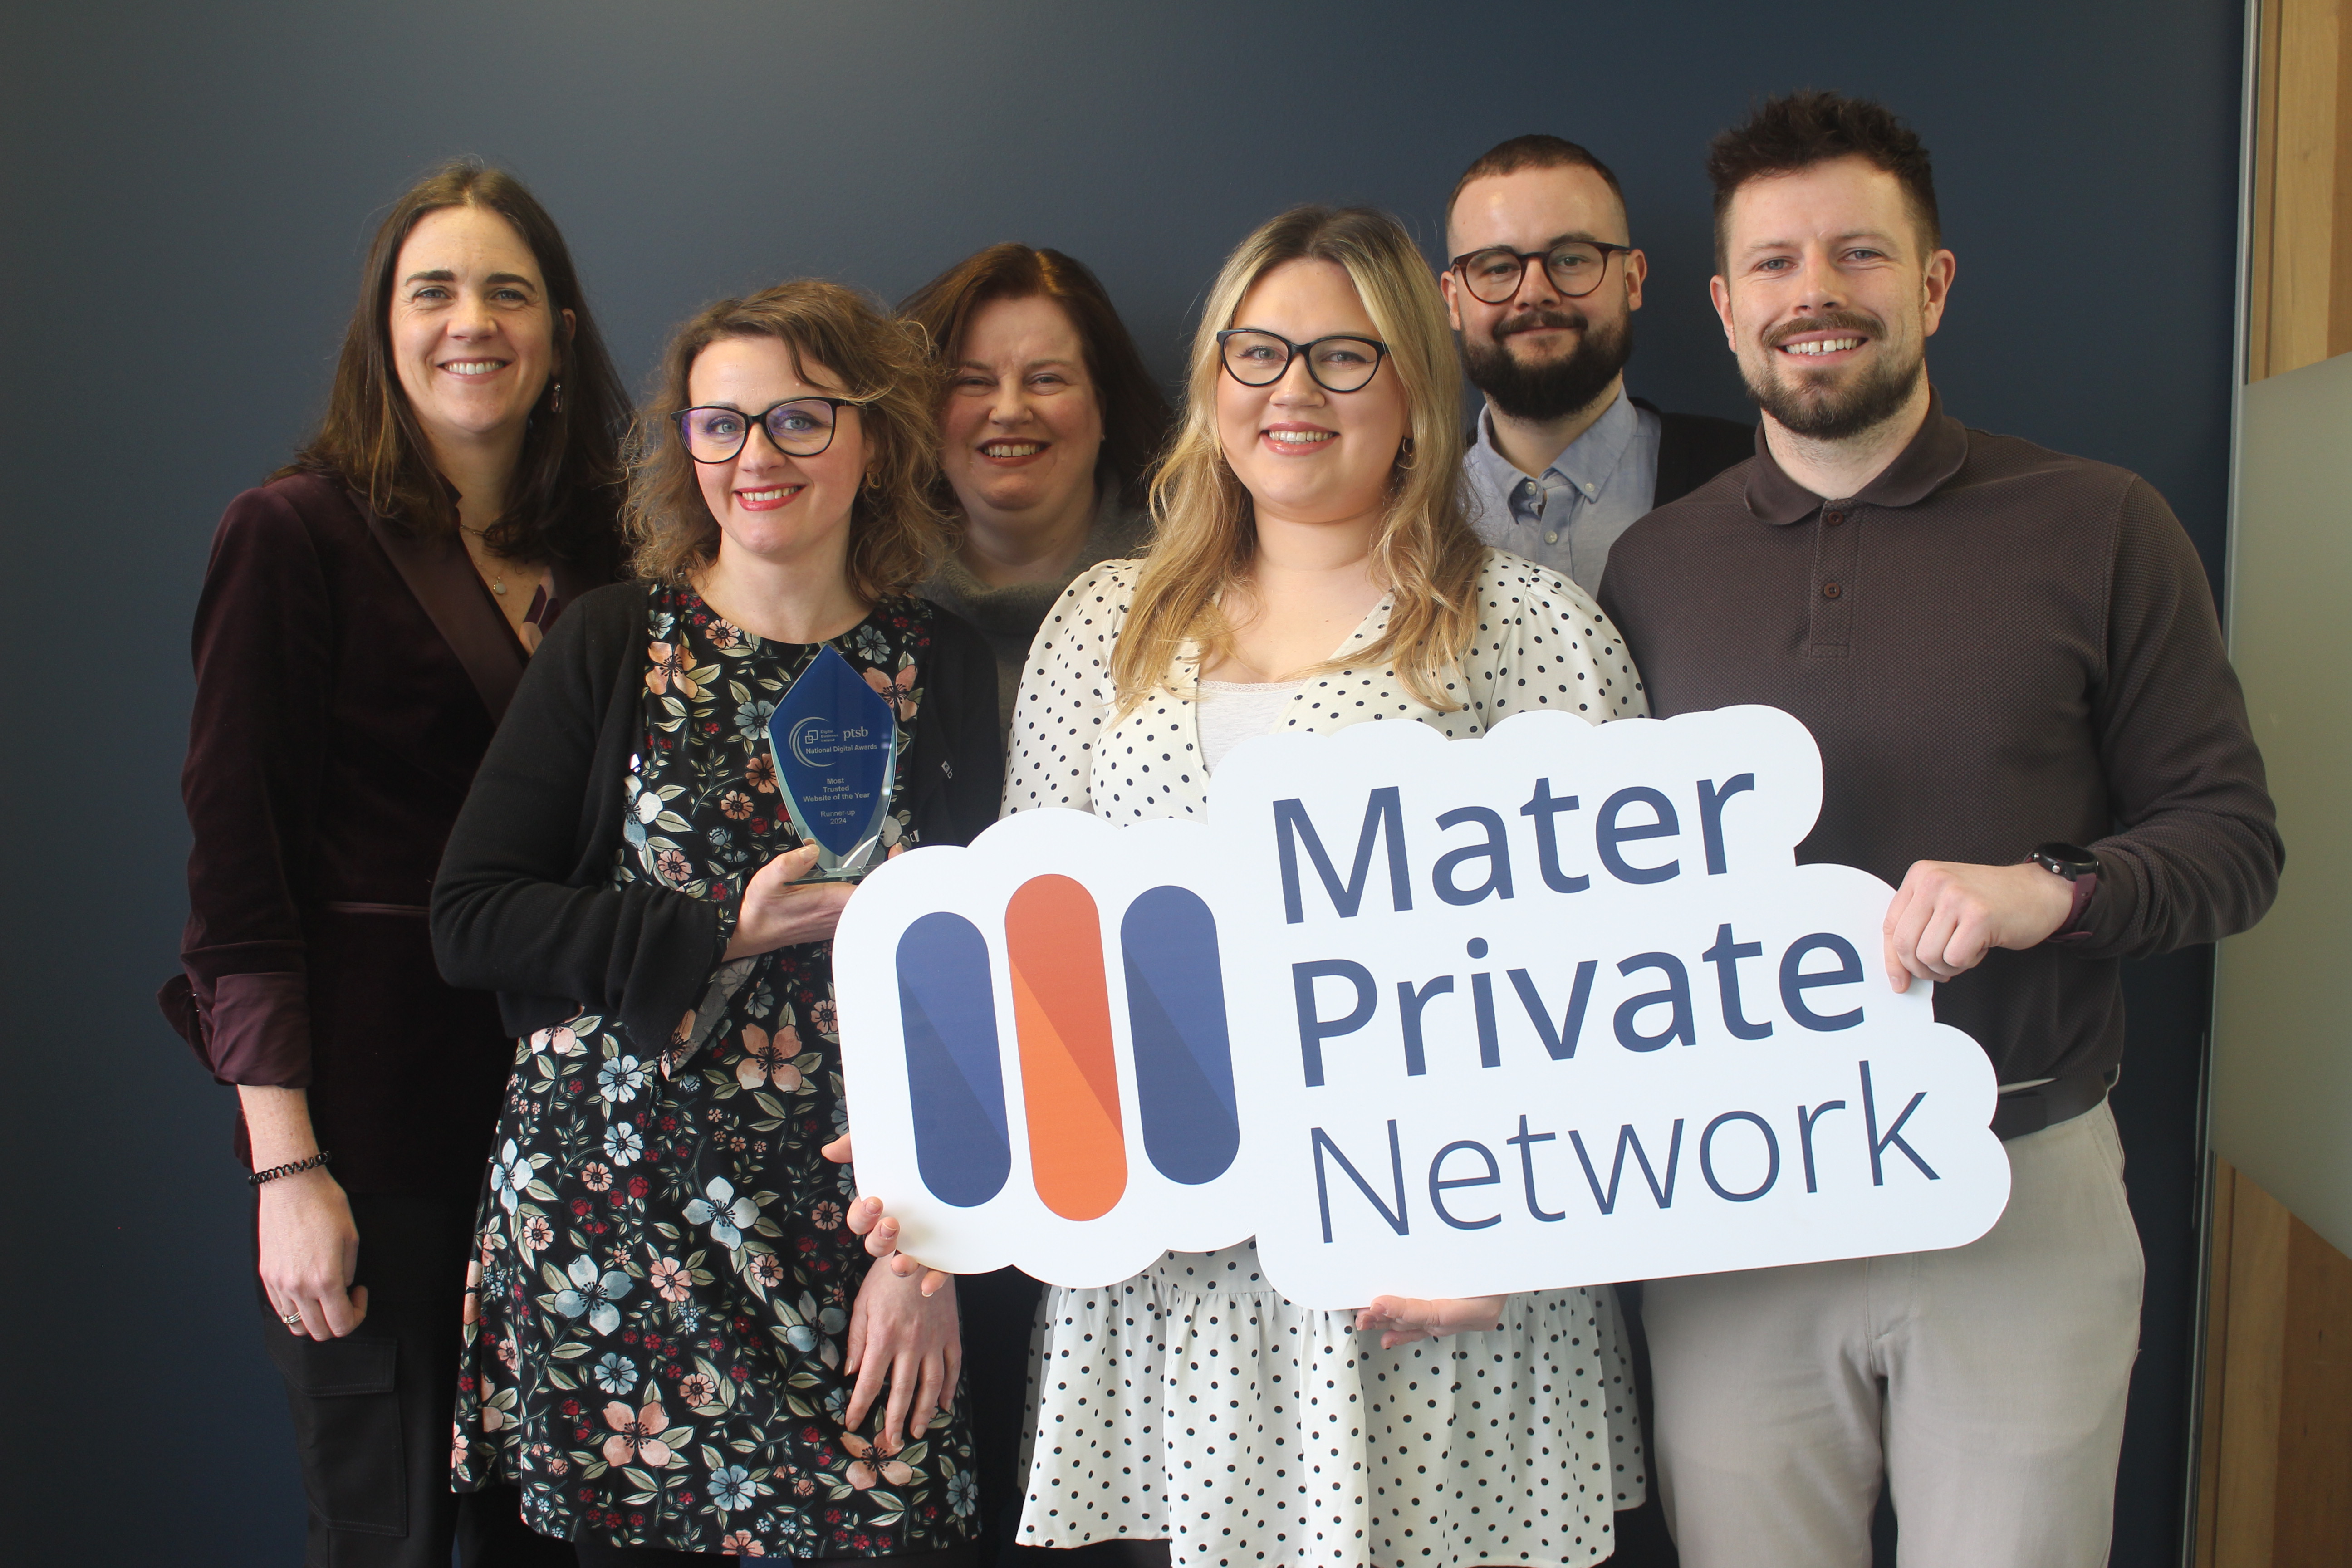 The Mater Private Network marketing team, consisting of four women and two men are smiling with an award plaque and a Mater Private Network sign.